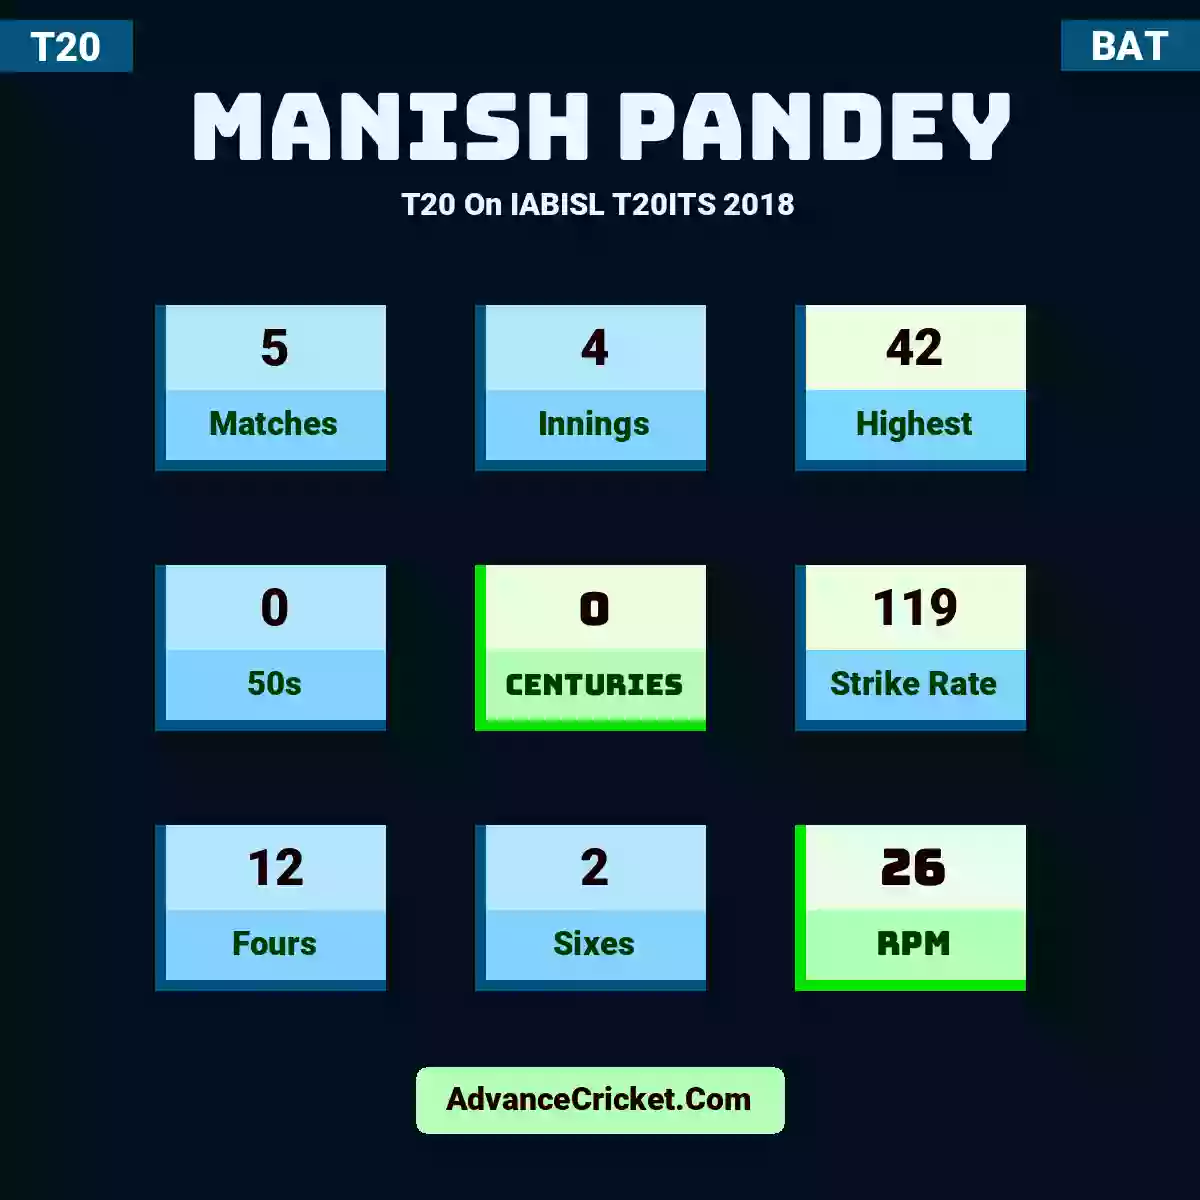 Manish Pandey T20  On IABISL T20ITS 2018, Manish Pandey played 5 matches, scored 42 runs as highest, 0 half-centuries, and 0 centuries, with a strike rate of 119. M.Pandey hit 12 fours and 2 sixes, with an RPM of 26.